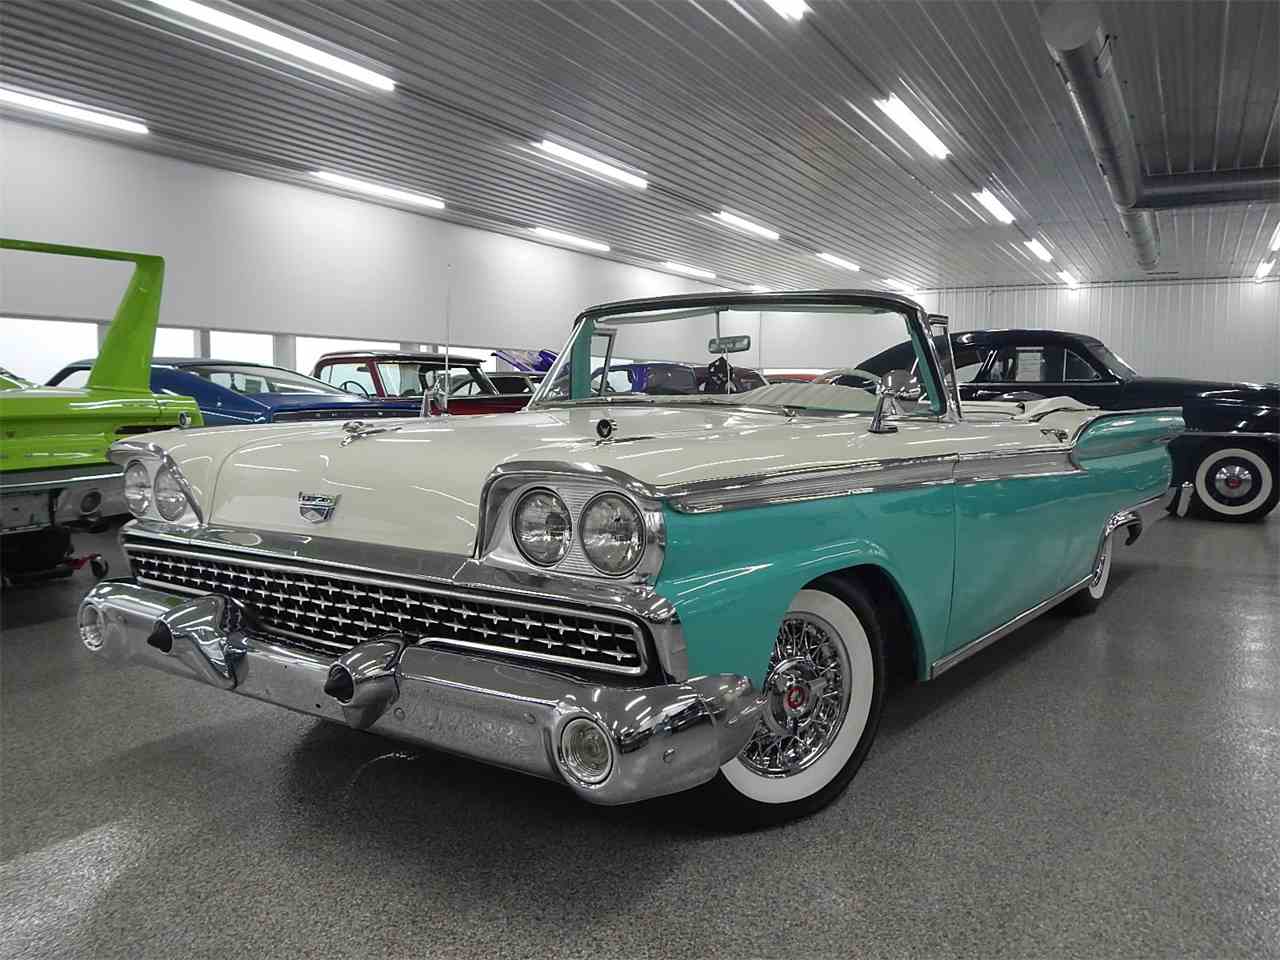 1959 Ford Fairlane Galaxie For Sale Classiccars Cc 1010399 throughout Classic Cars Celina Ohio